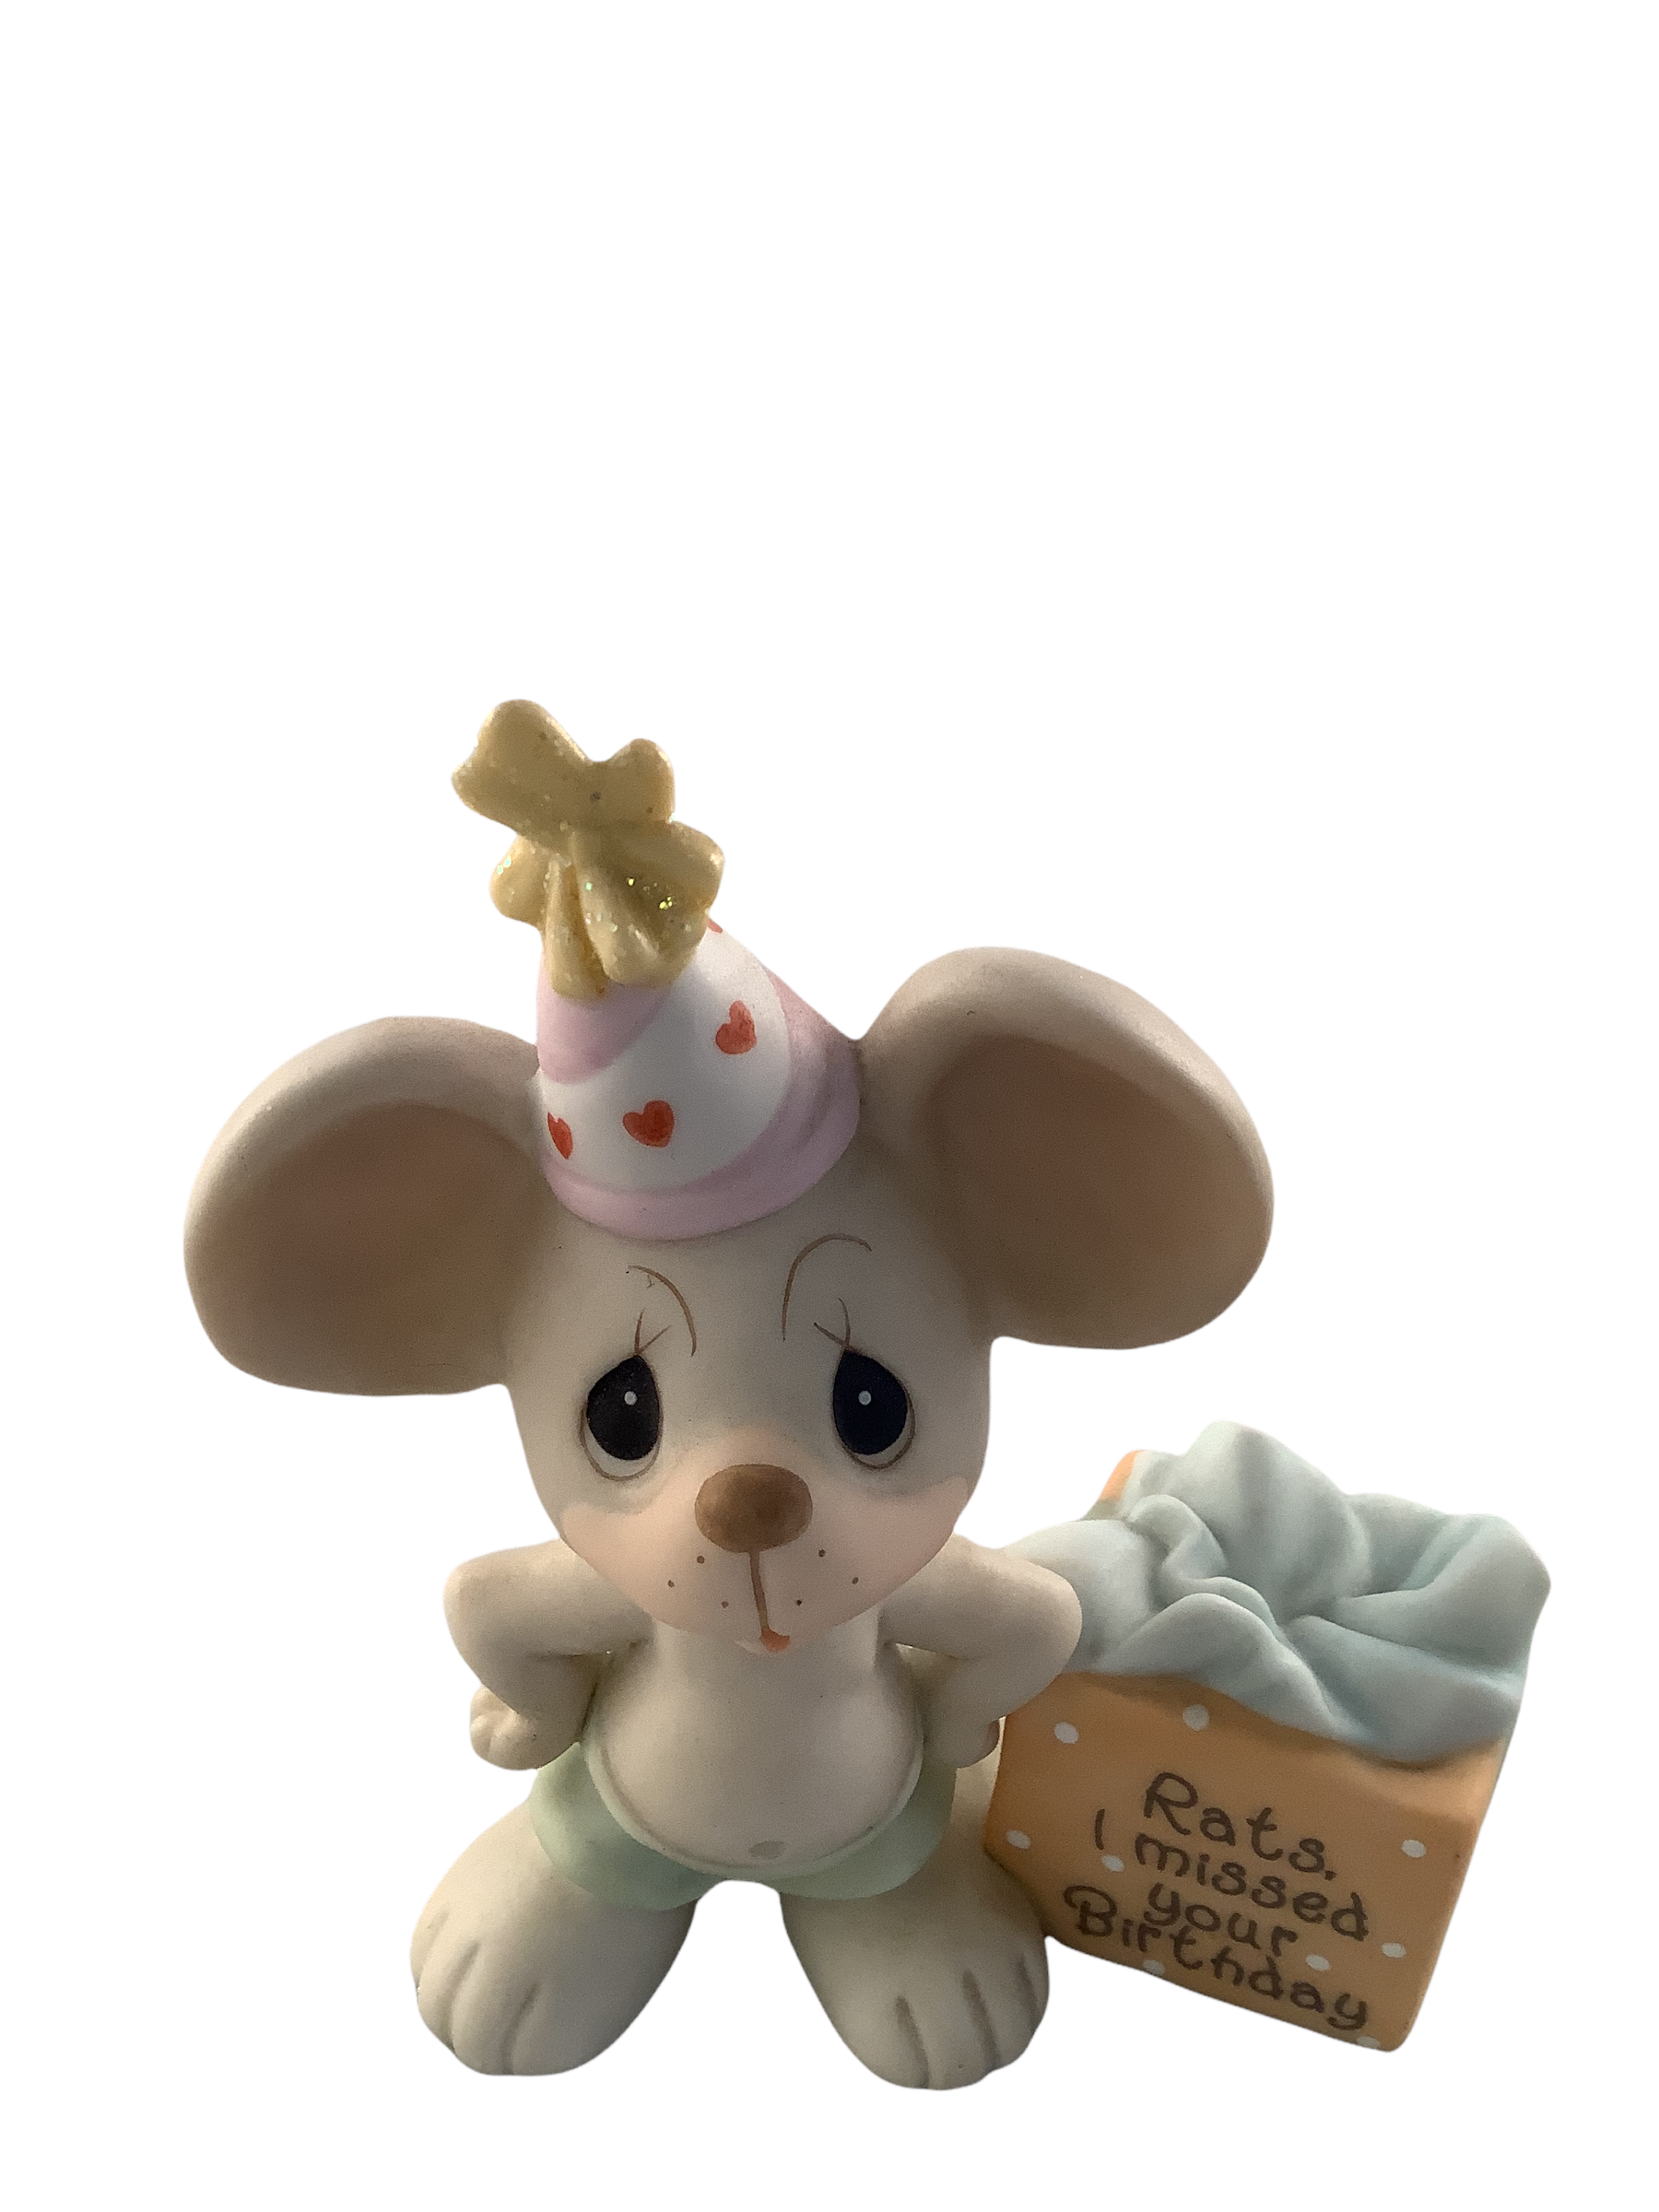 Rats, I Missed Your Birthday - Precious Moment Figurine